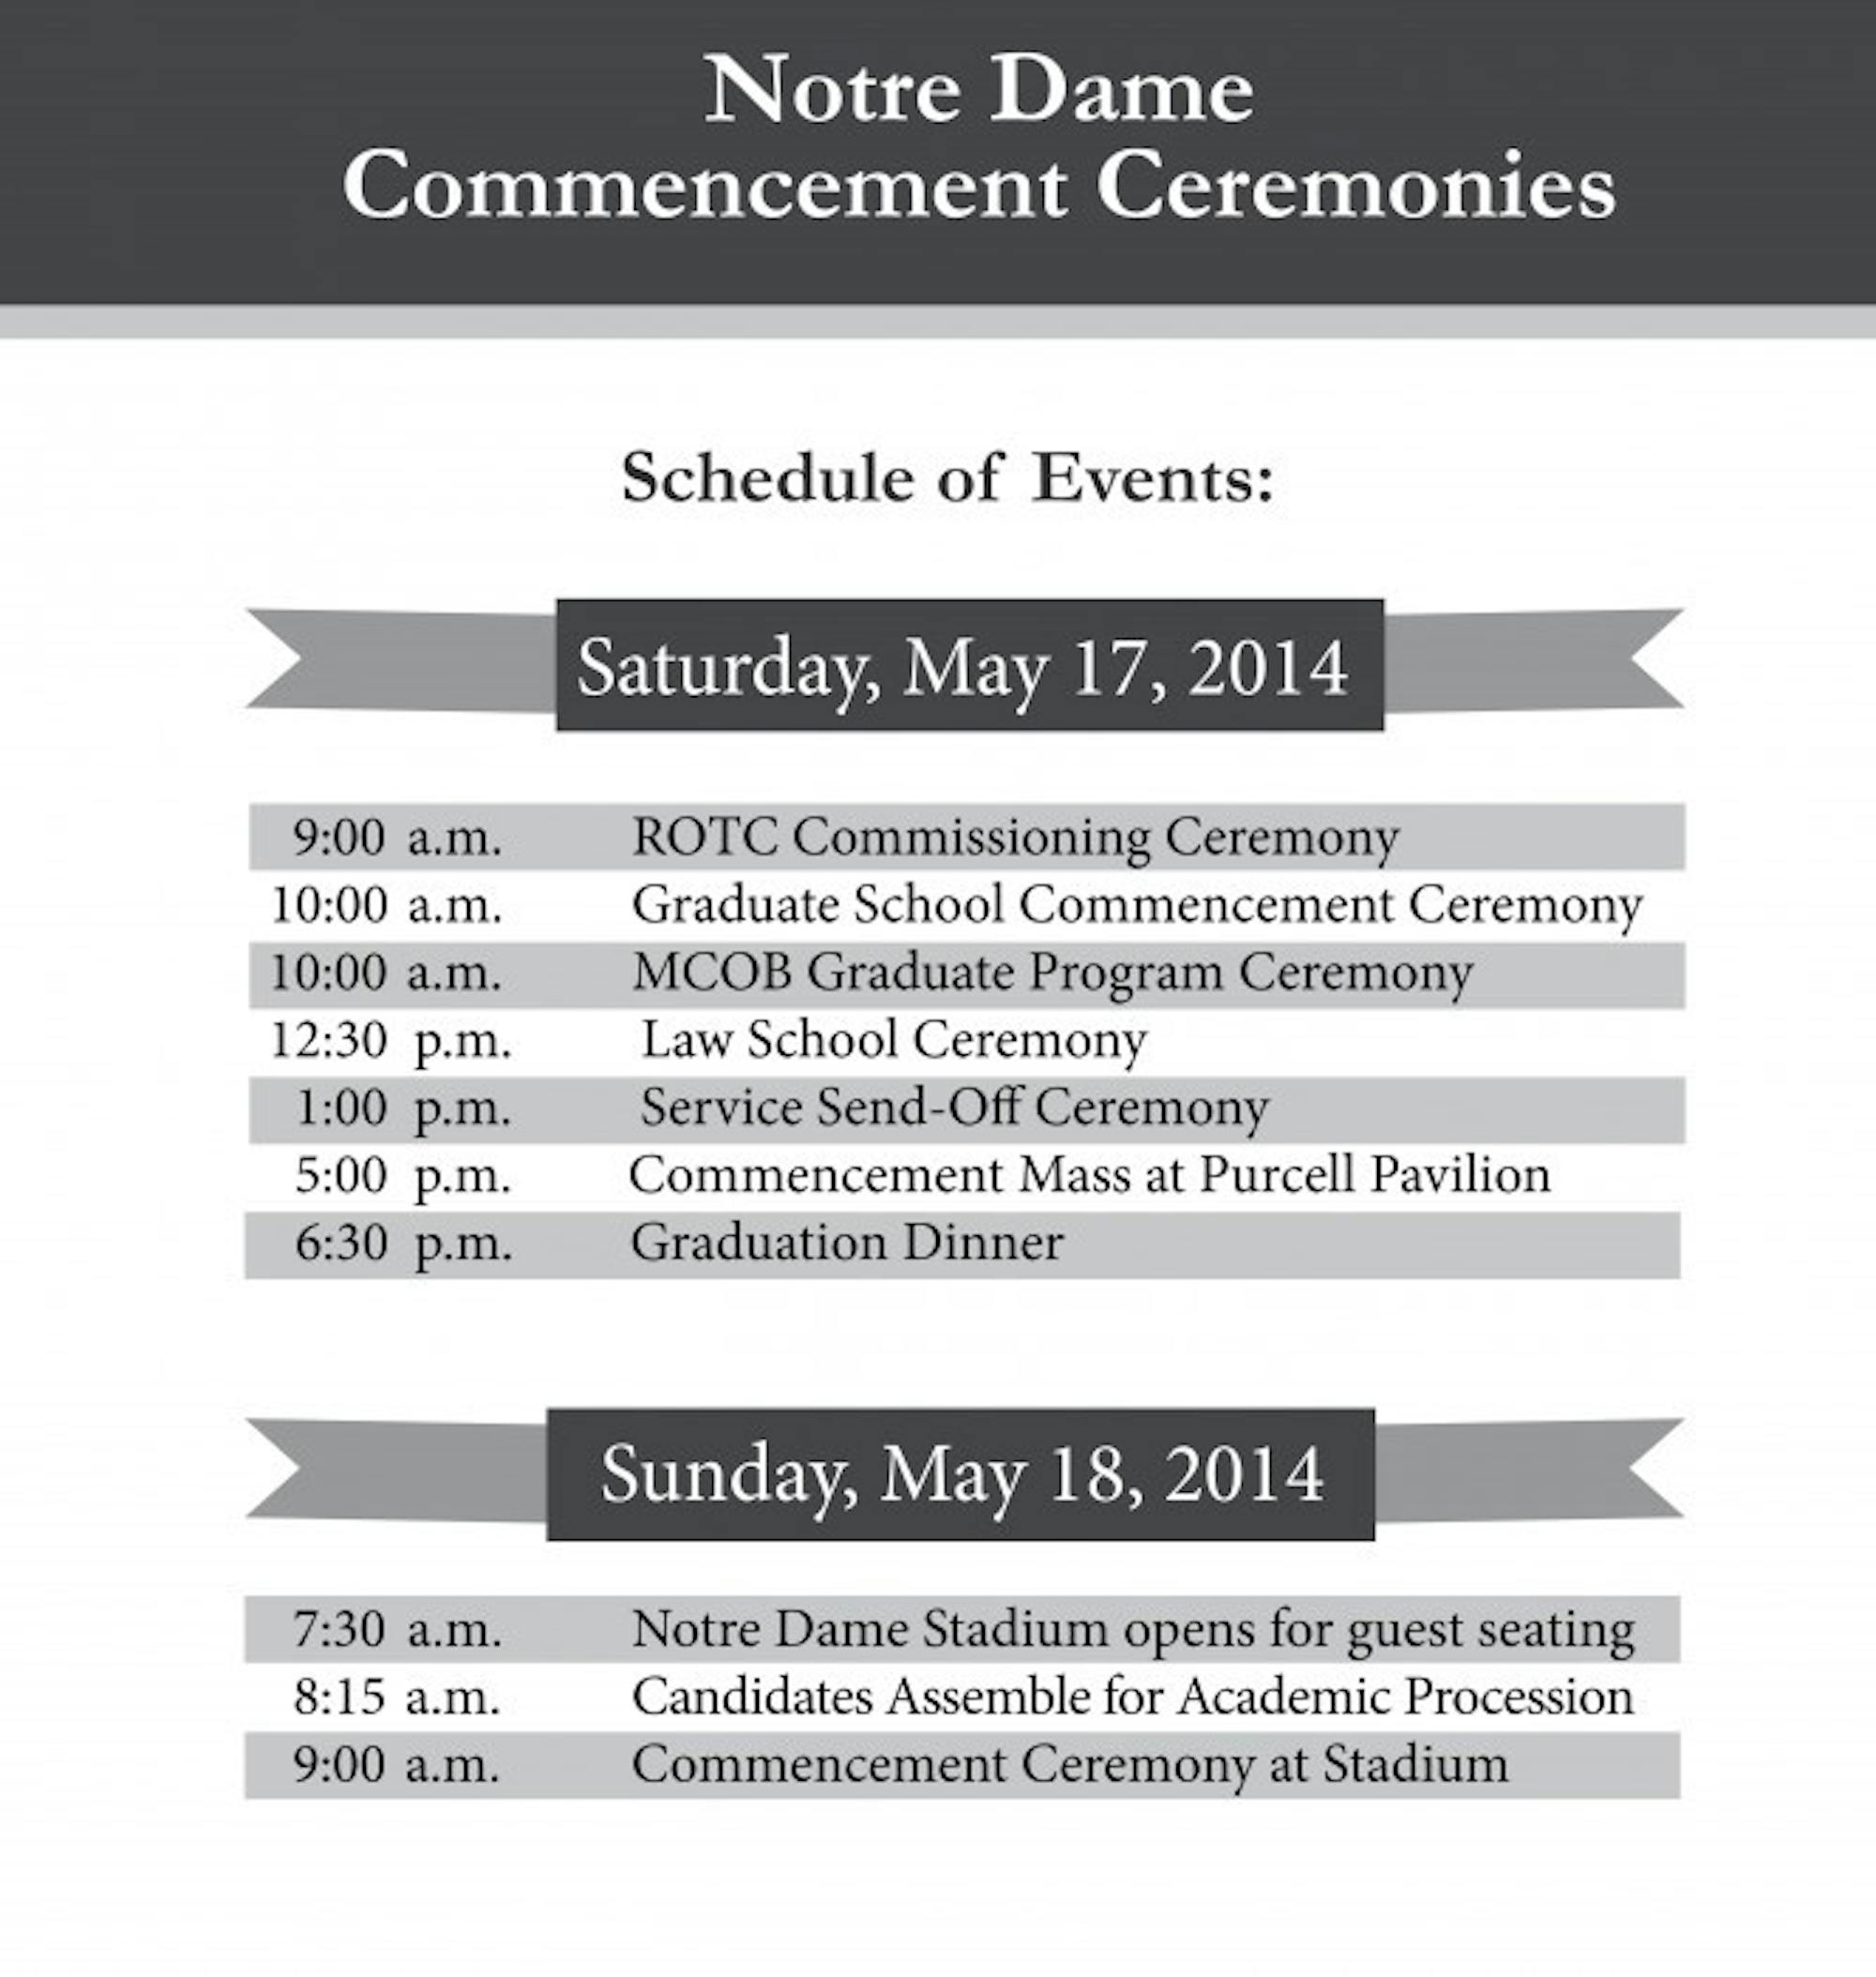 ND_Commencement